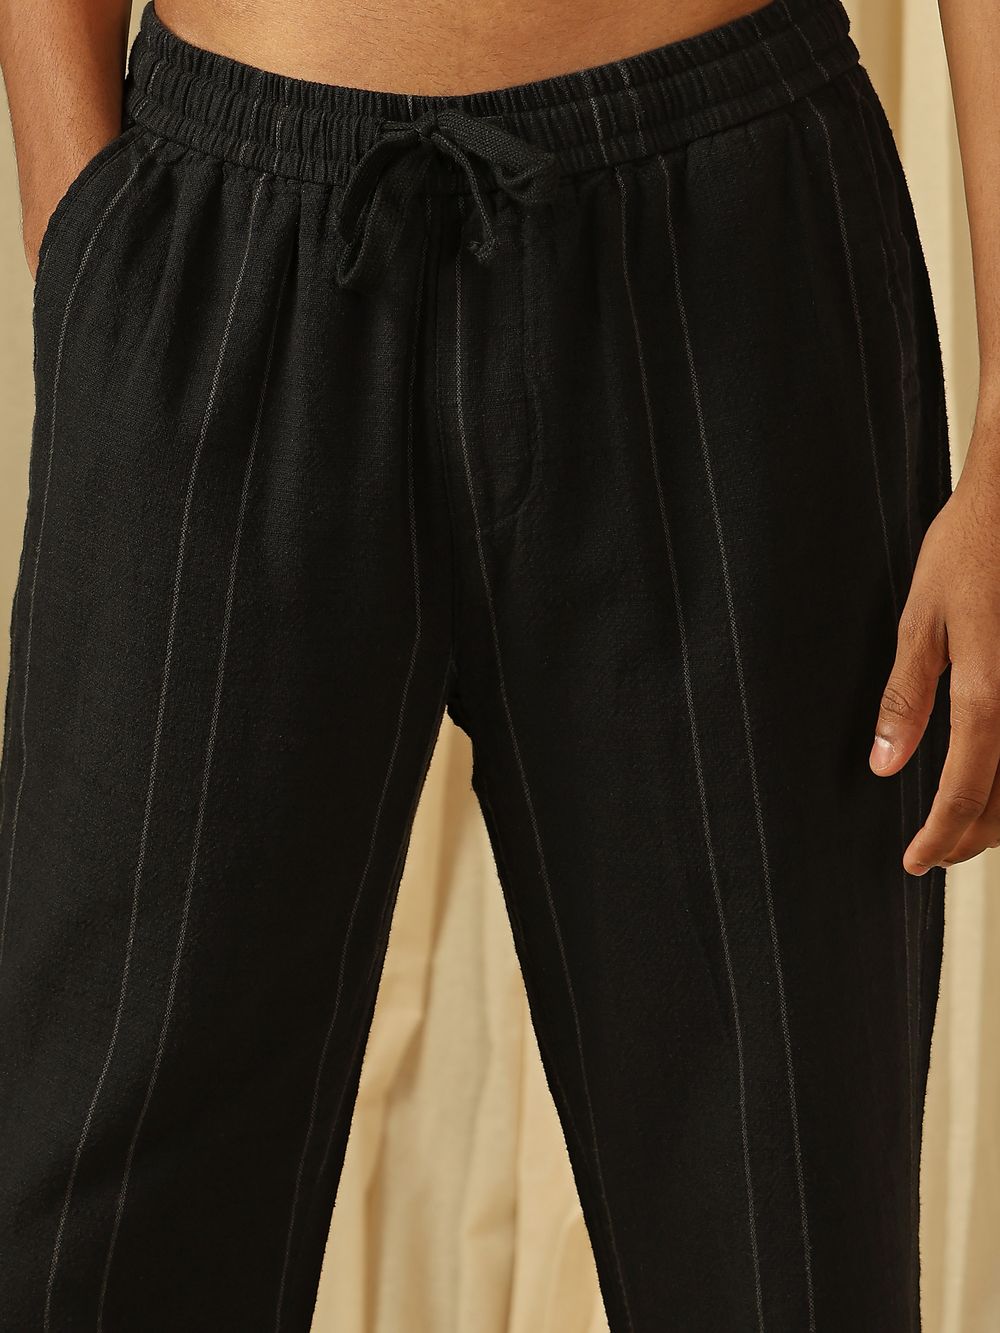 Black Relaxed Fit Drawstring Trouser